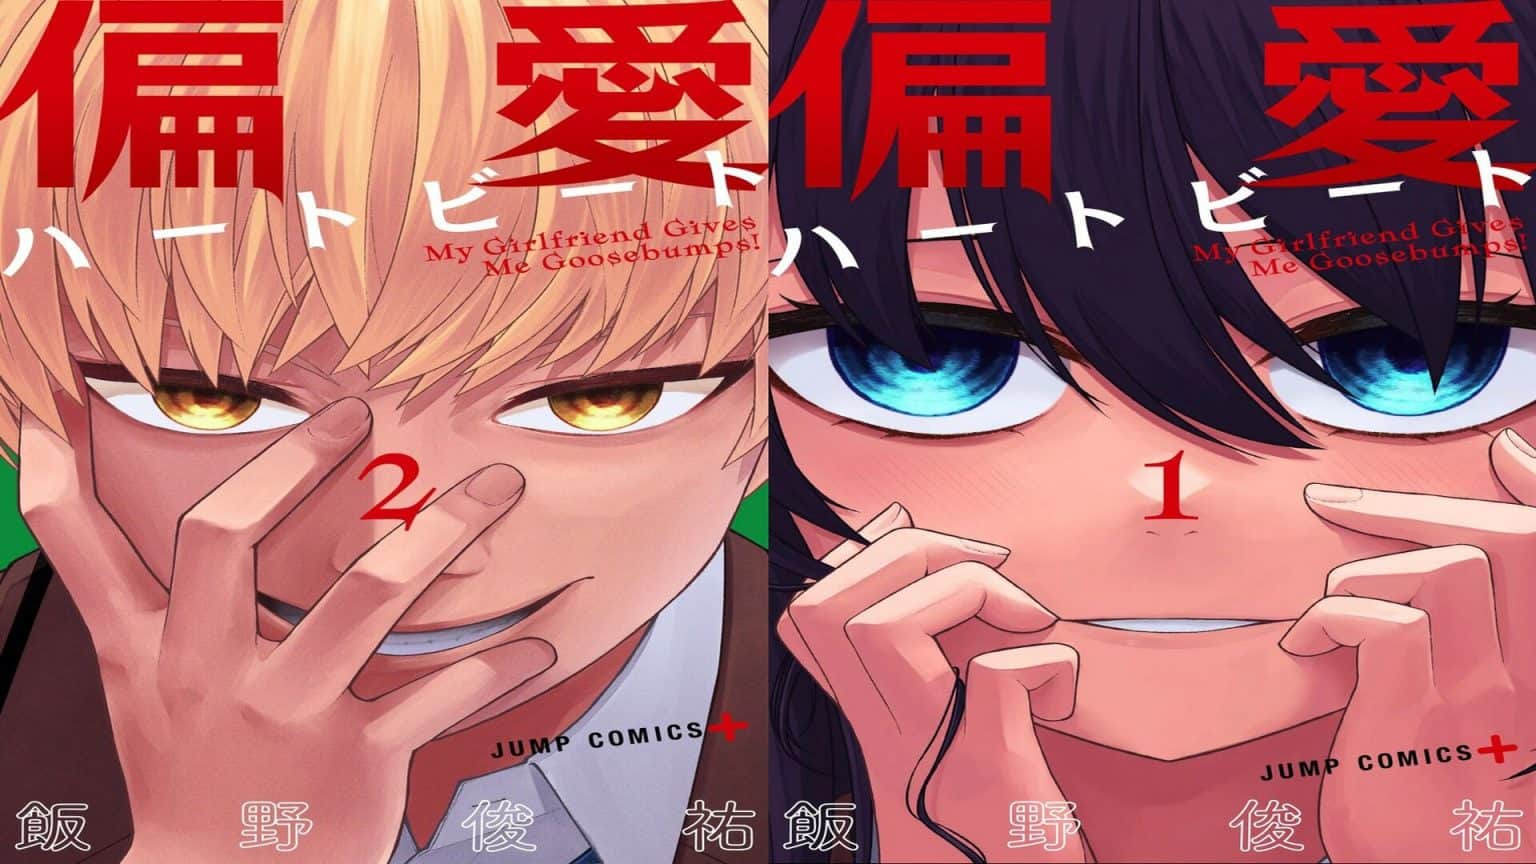 My Girlfriend Gives Me Goosebumps Chapter 21 Release Date And Spoilers